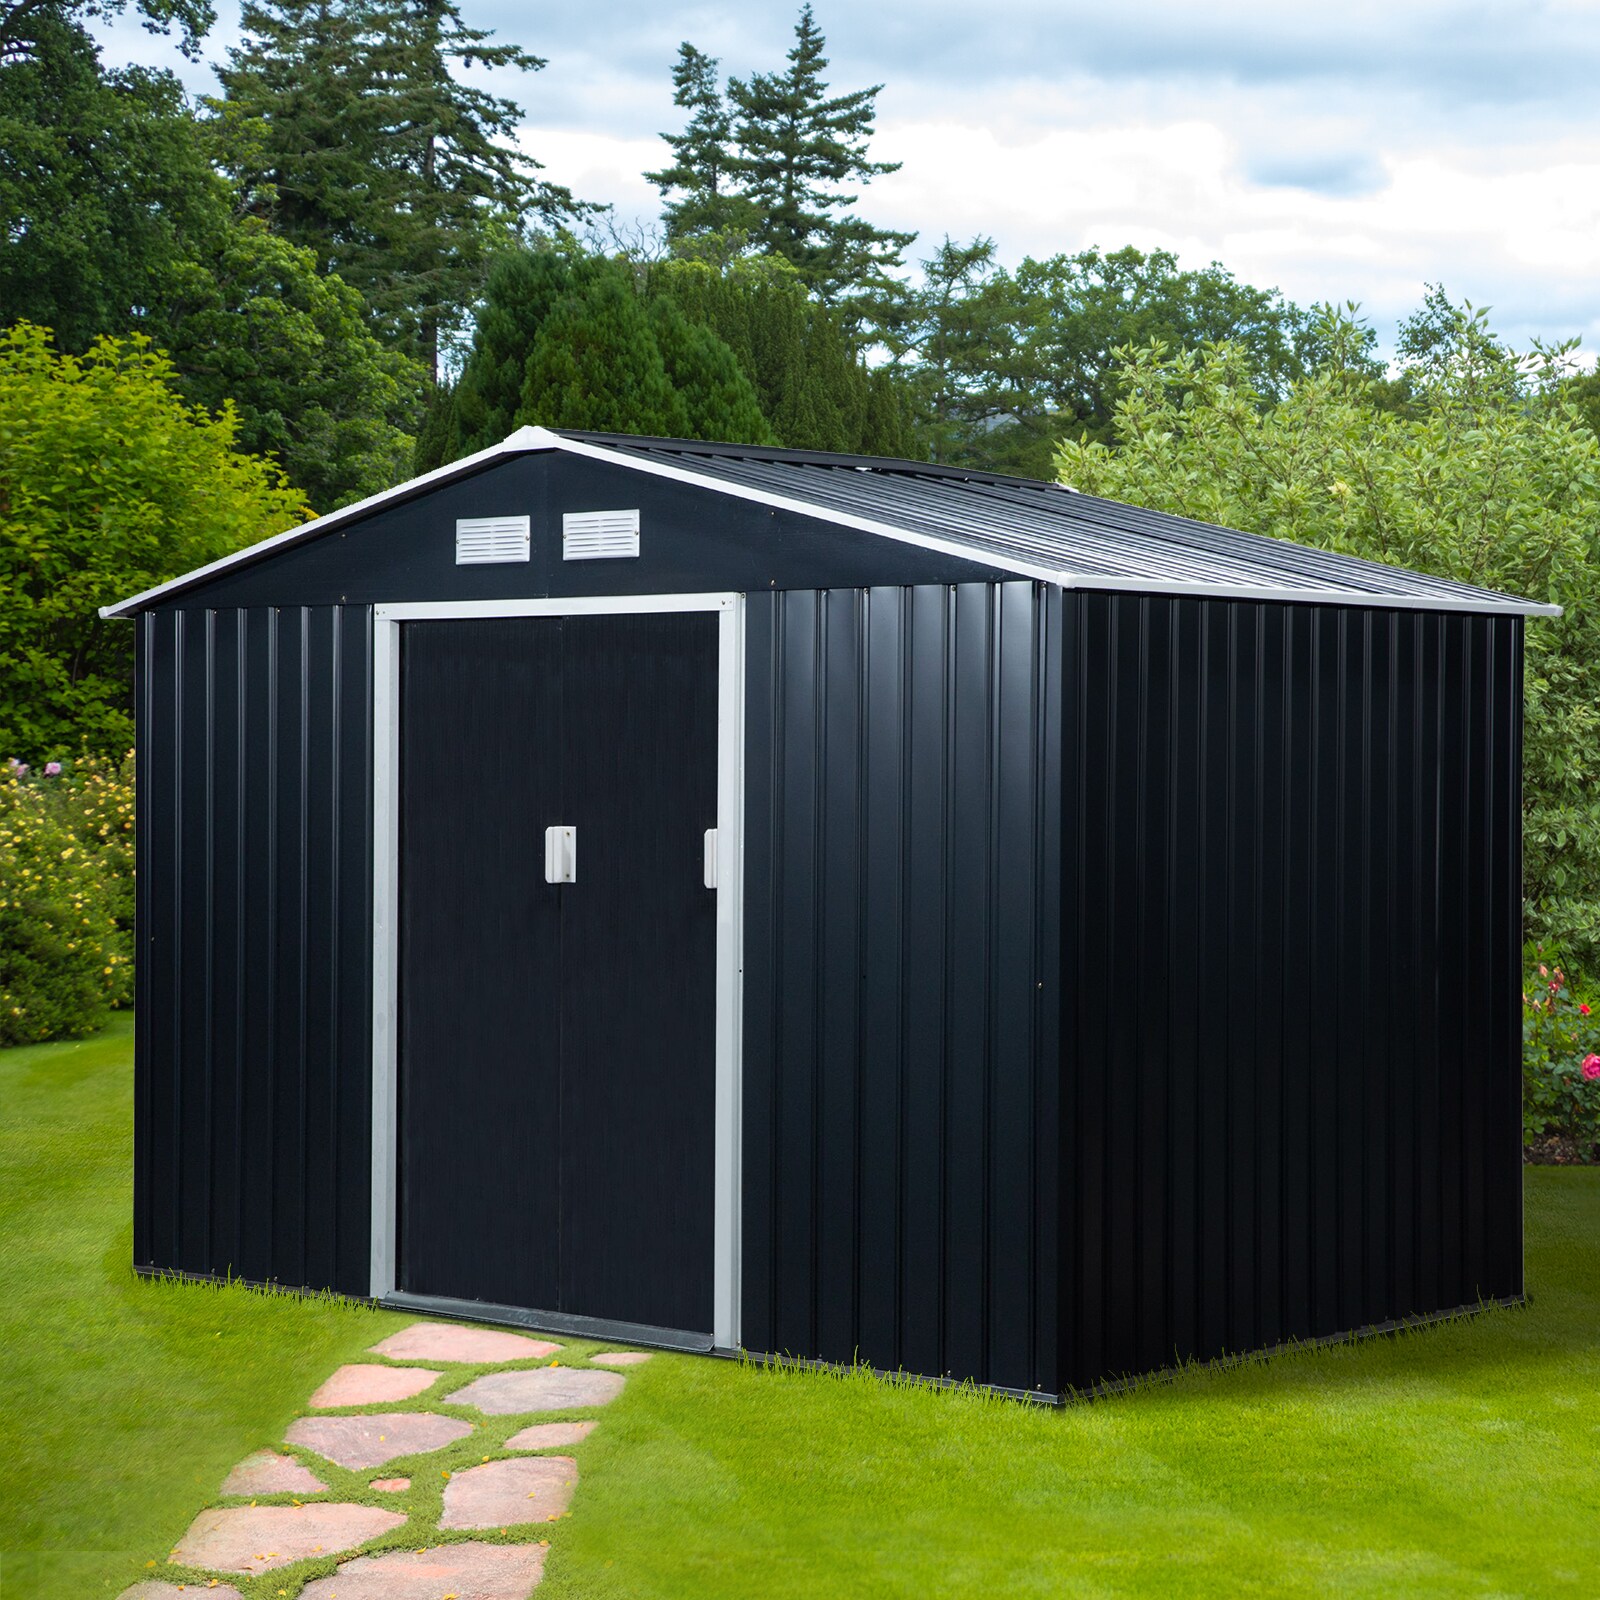 Outsunny 9' x 4' Metal Garden Storage Shed Tool House with Sliding Door Spacious Layout & Durable Construction for Backyard Patio Lawn Dark Grey 